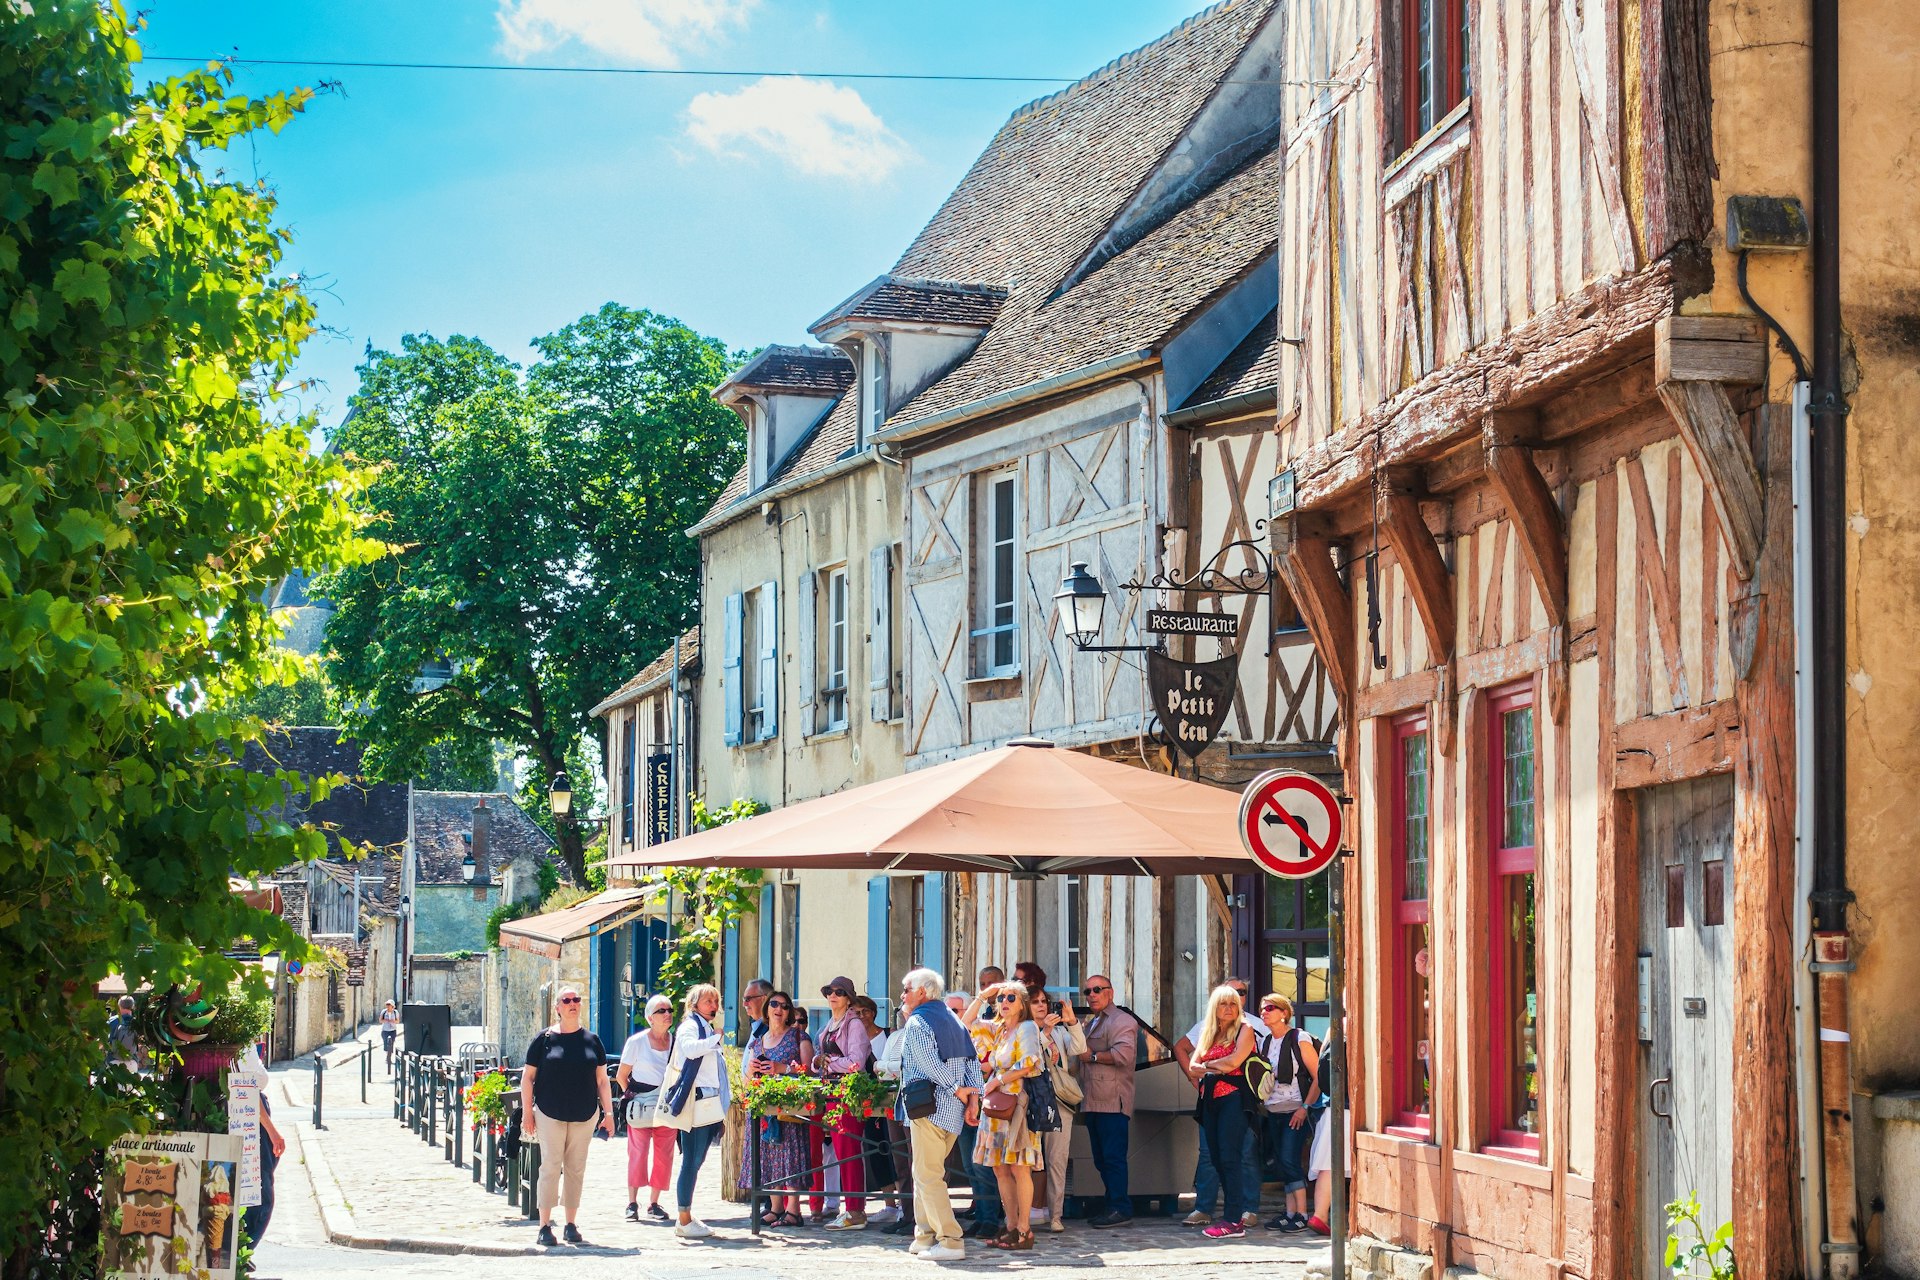 Tourists on foot on a pretty tree-lined street in Provins, France